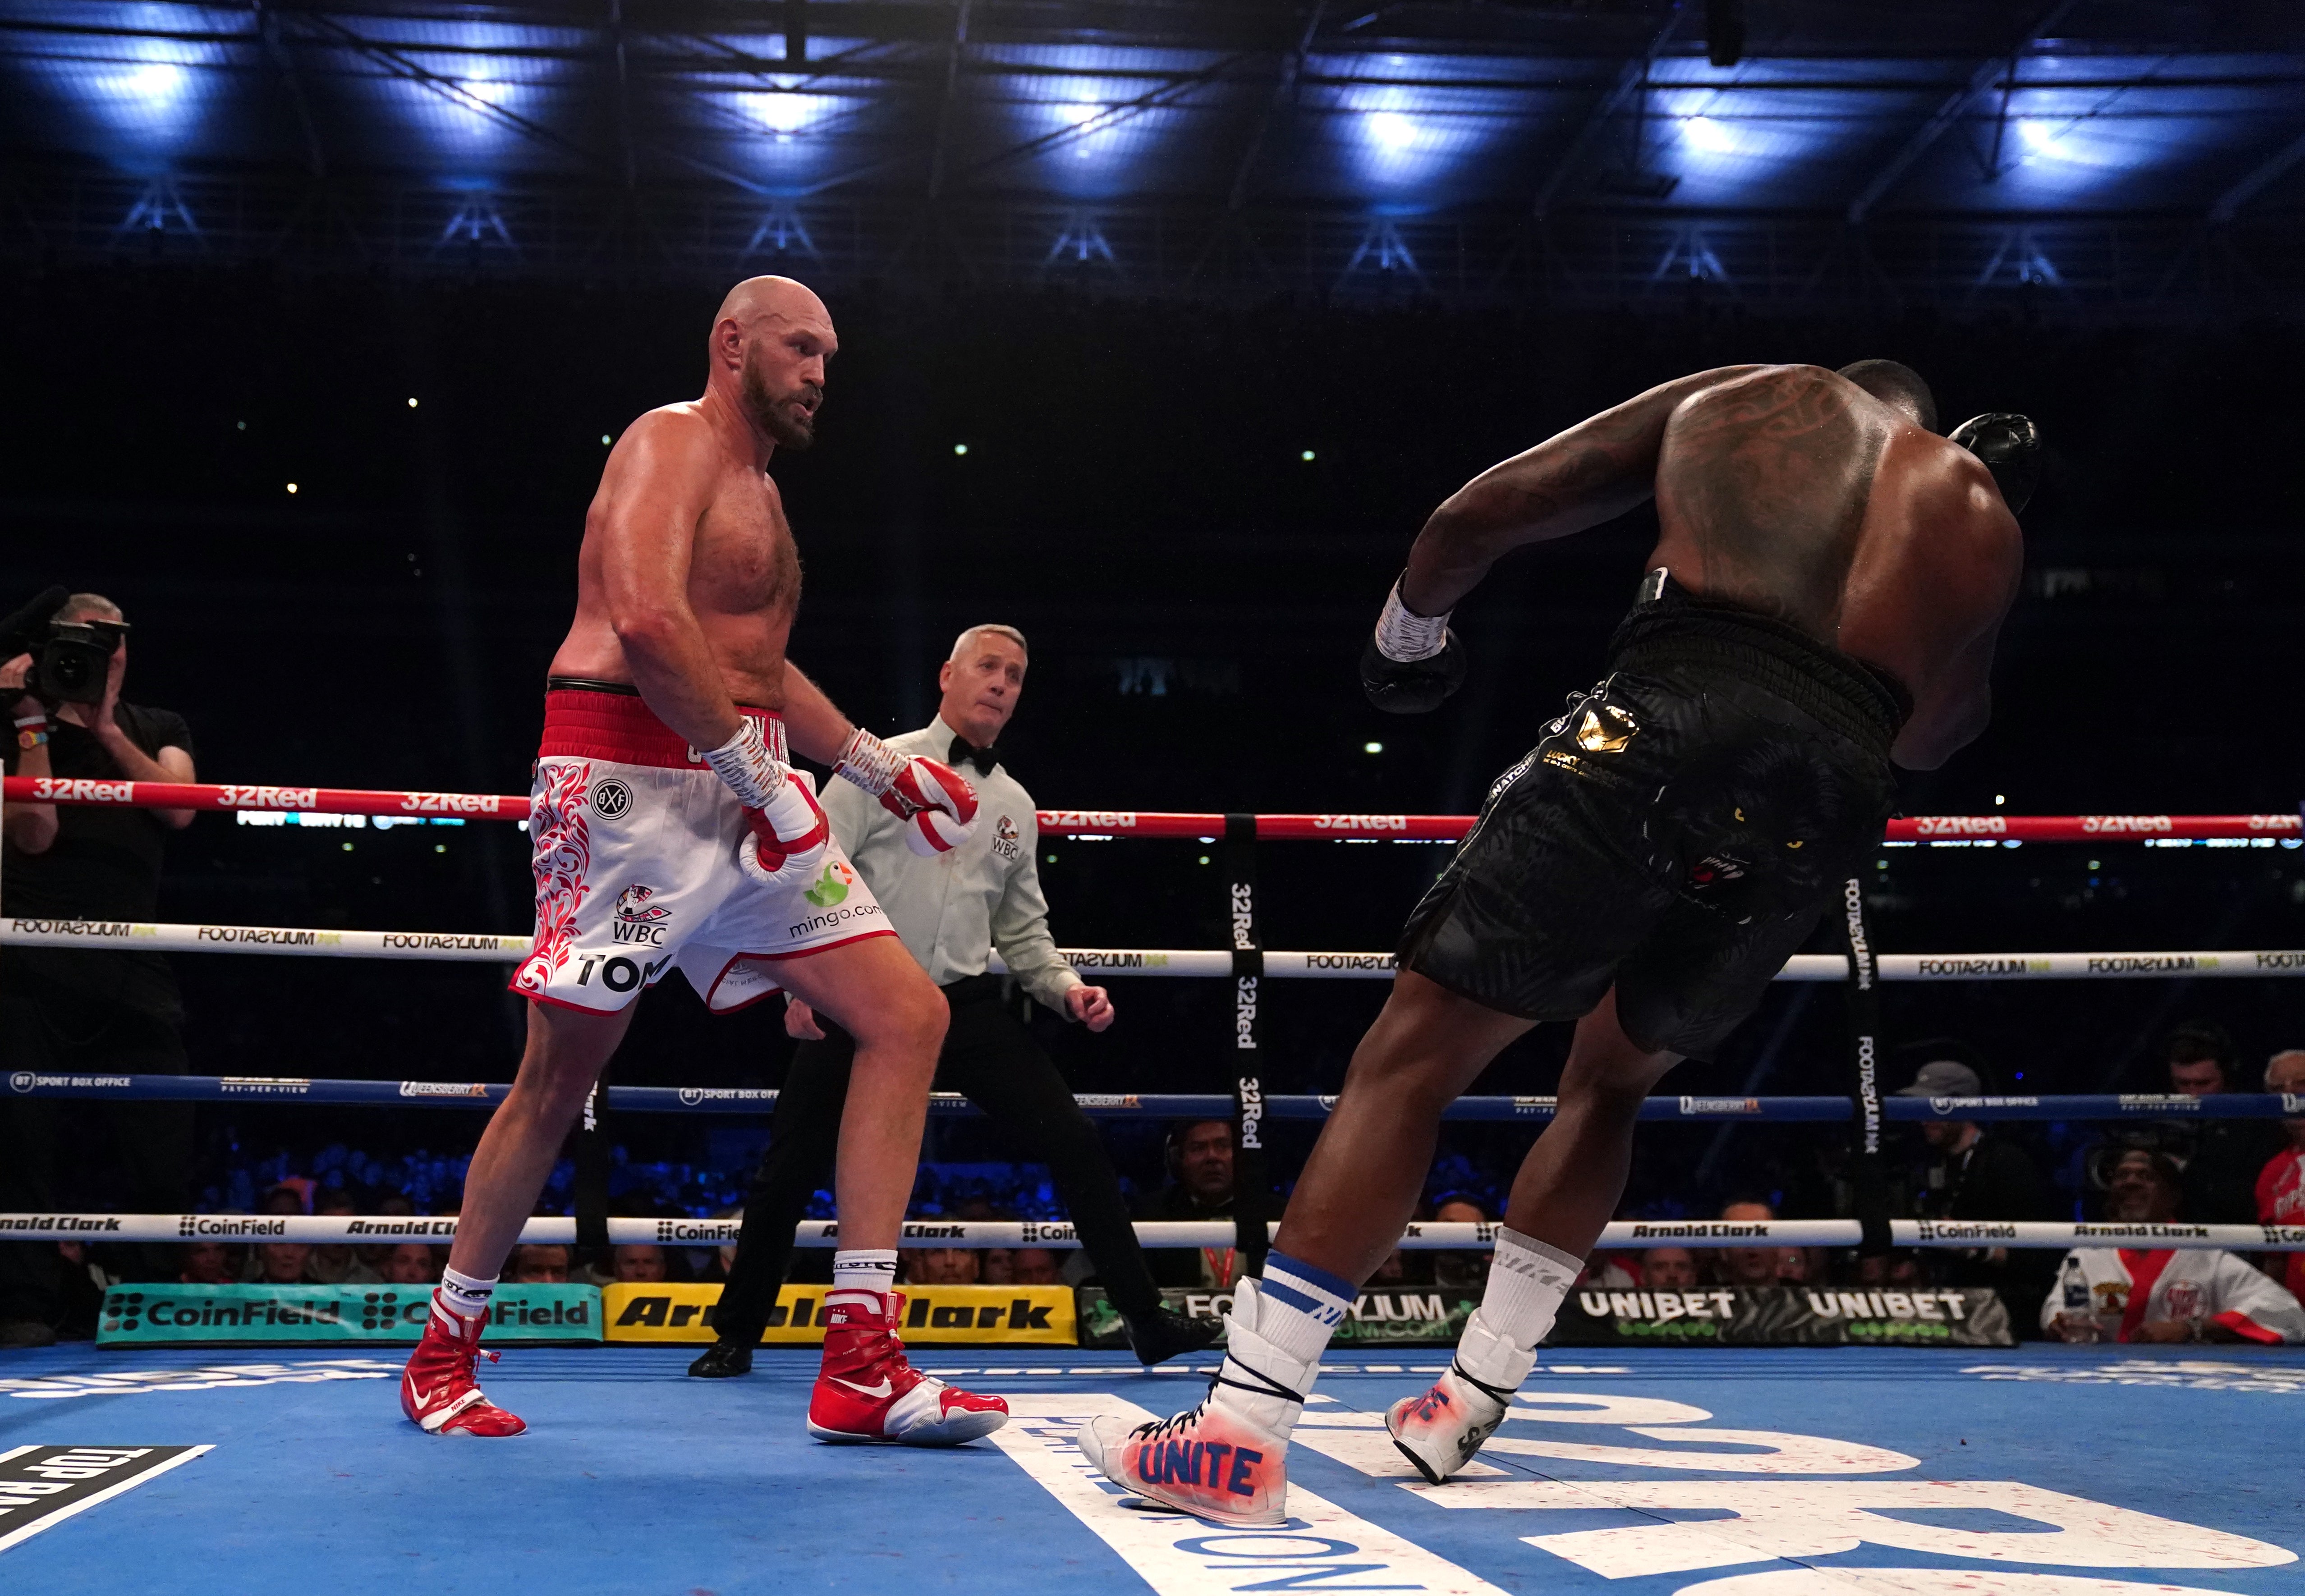 Tyson Fury (left) knocks down Dillian Whyte during the WBC heavyweight title fight at Wembley Stadium (Nick Potts/PA)